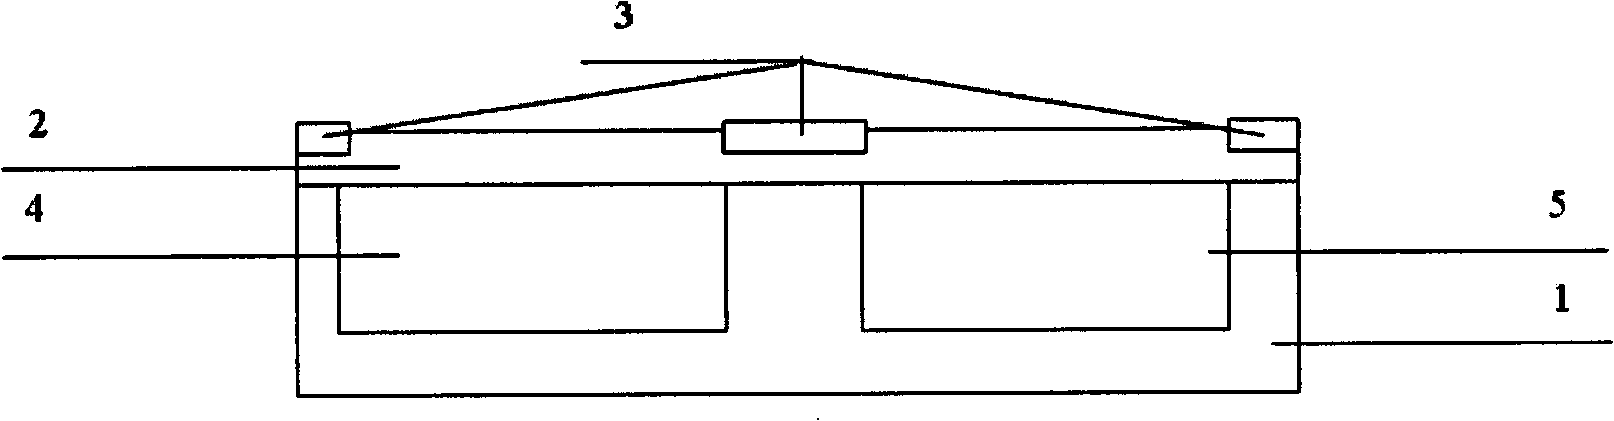 Method for preparing nano CMOS integrated circuit by SiO2 masking technique